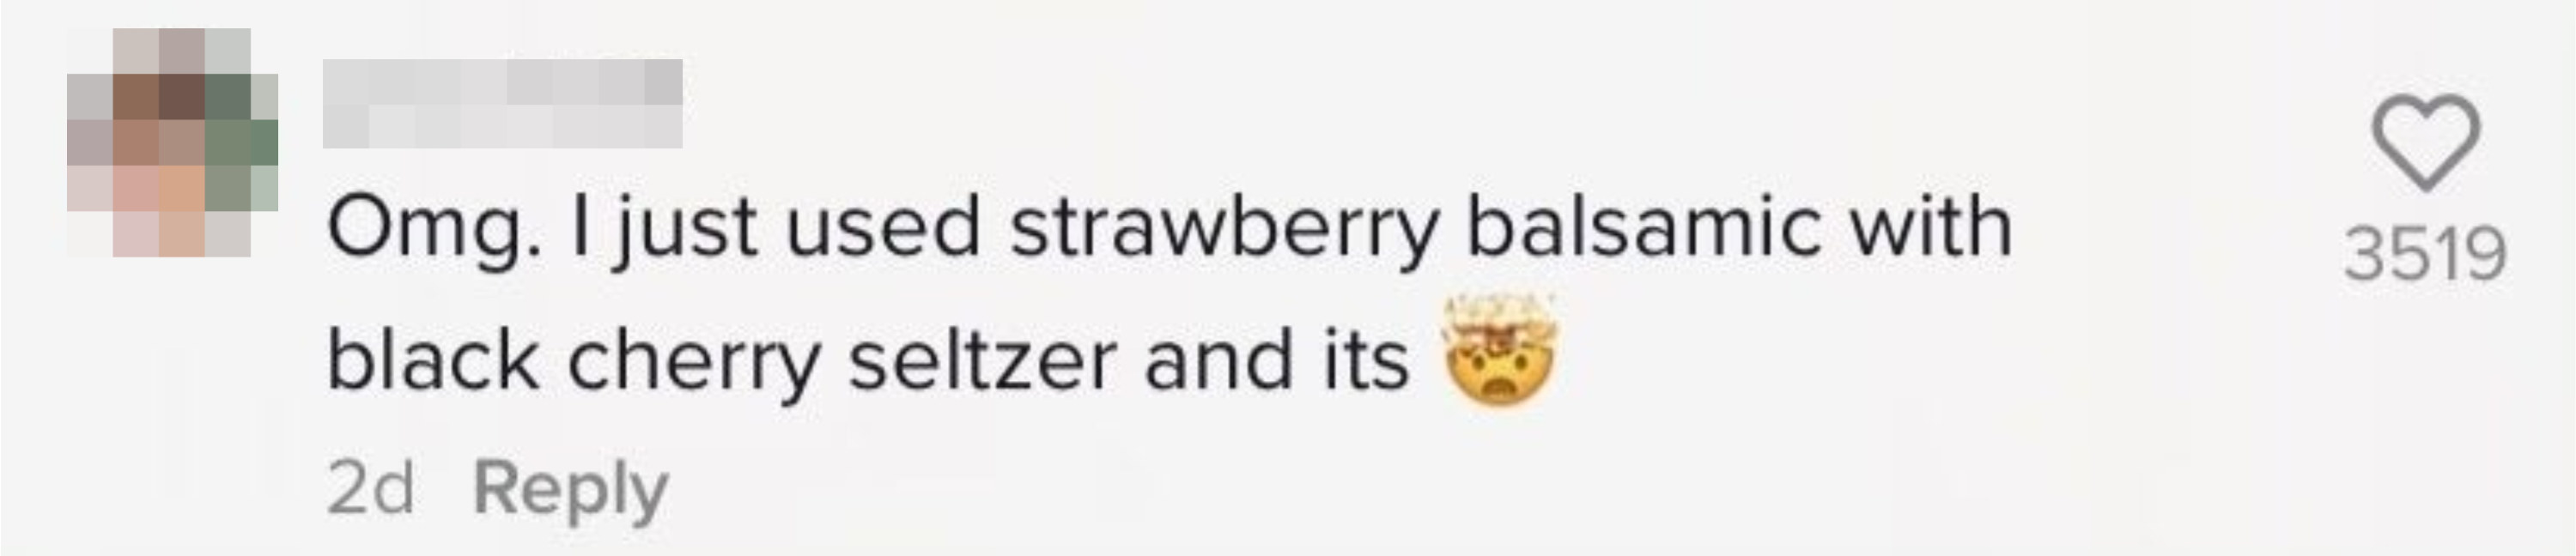 Another person said &quot;Omg; I just used strawberry balsamic with black cherry seltzer and its [head exploding emoji]&quot;